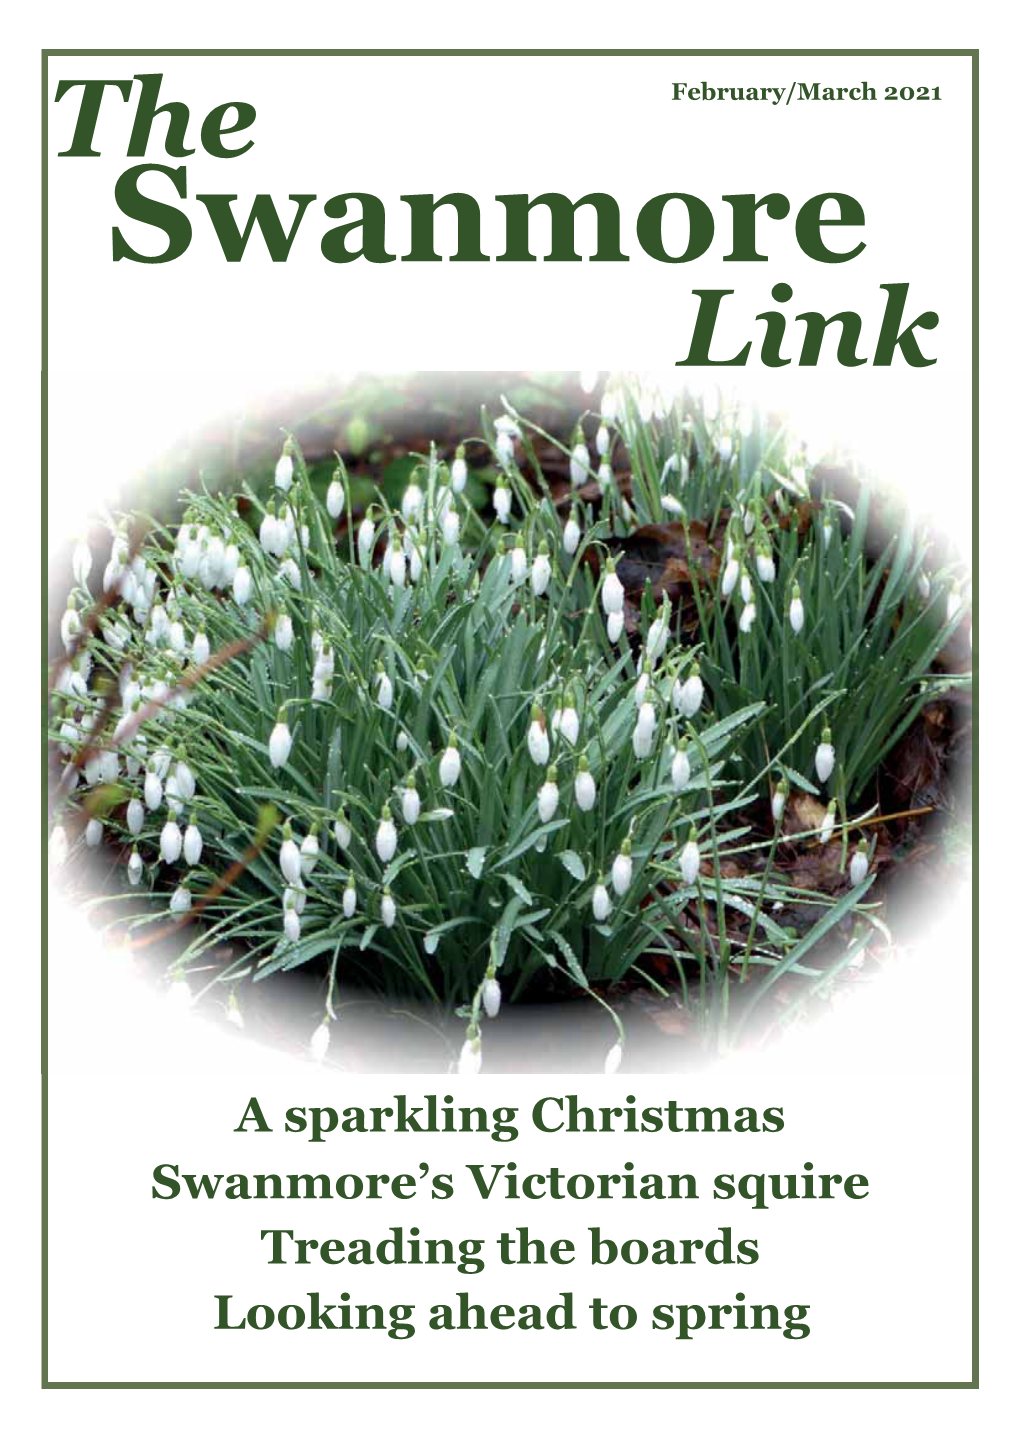 The Swanmore Link: February/March 2021